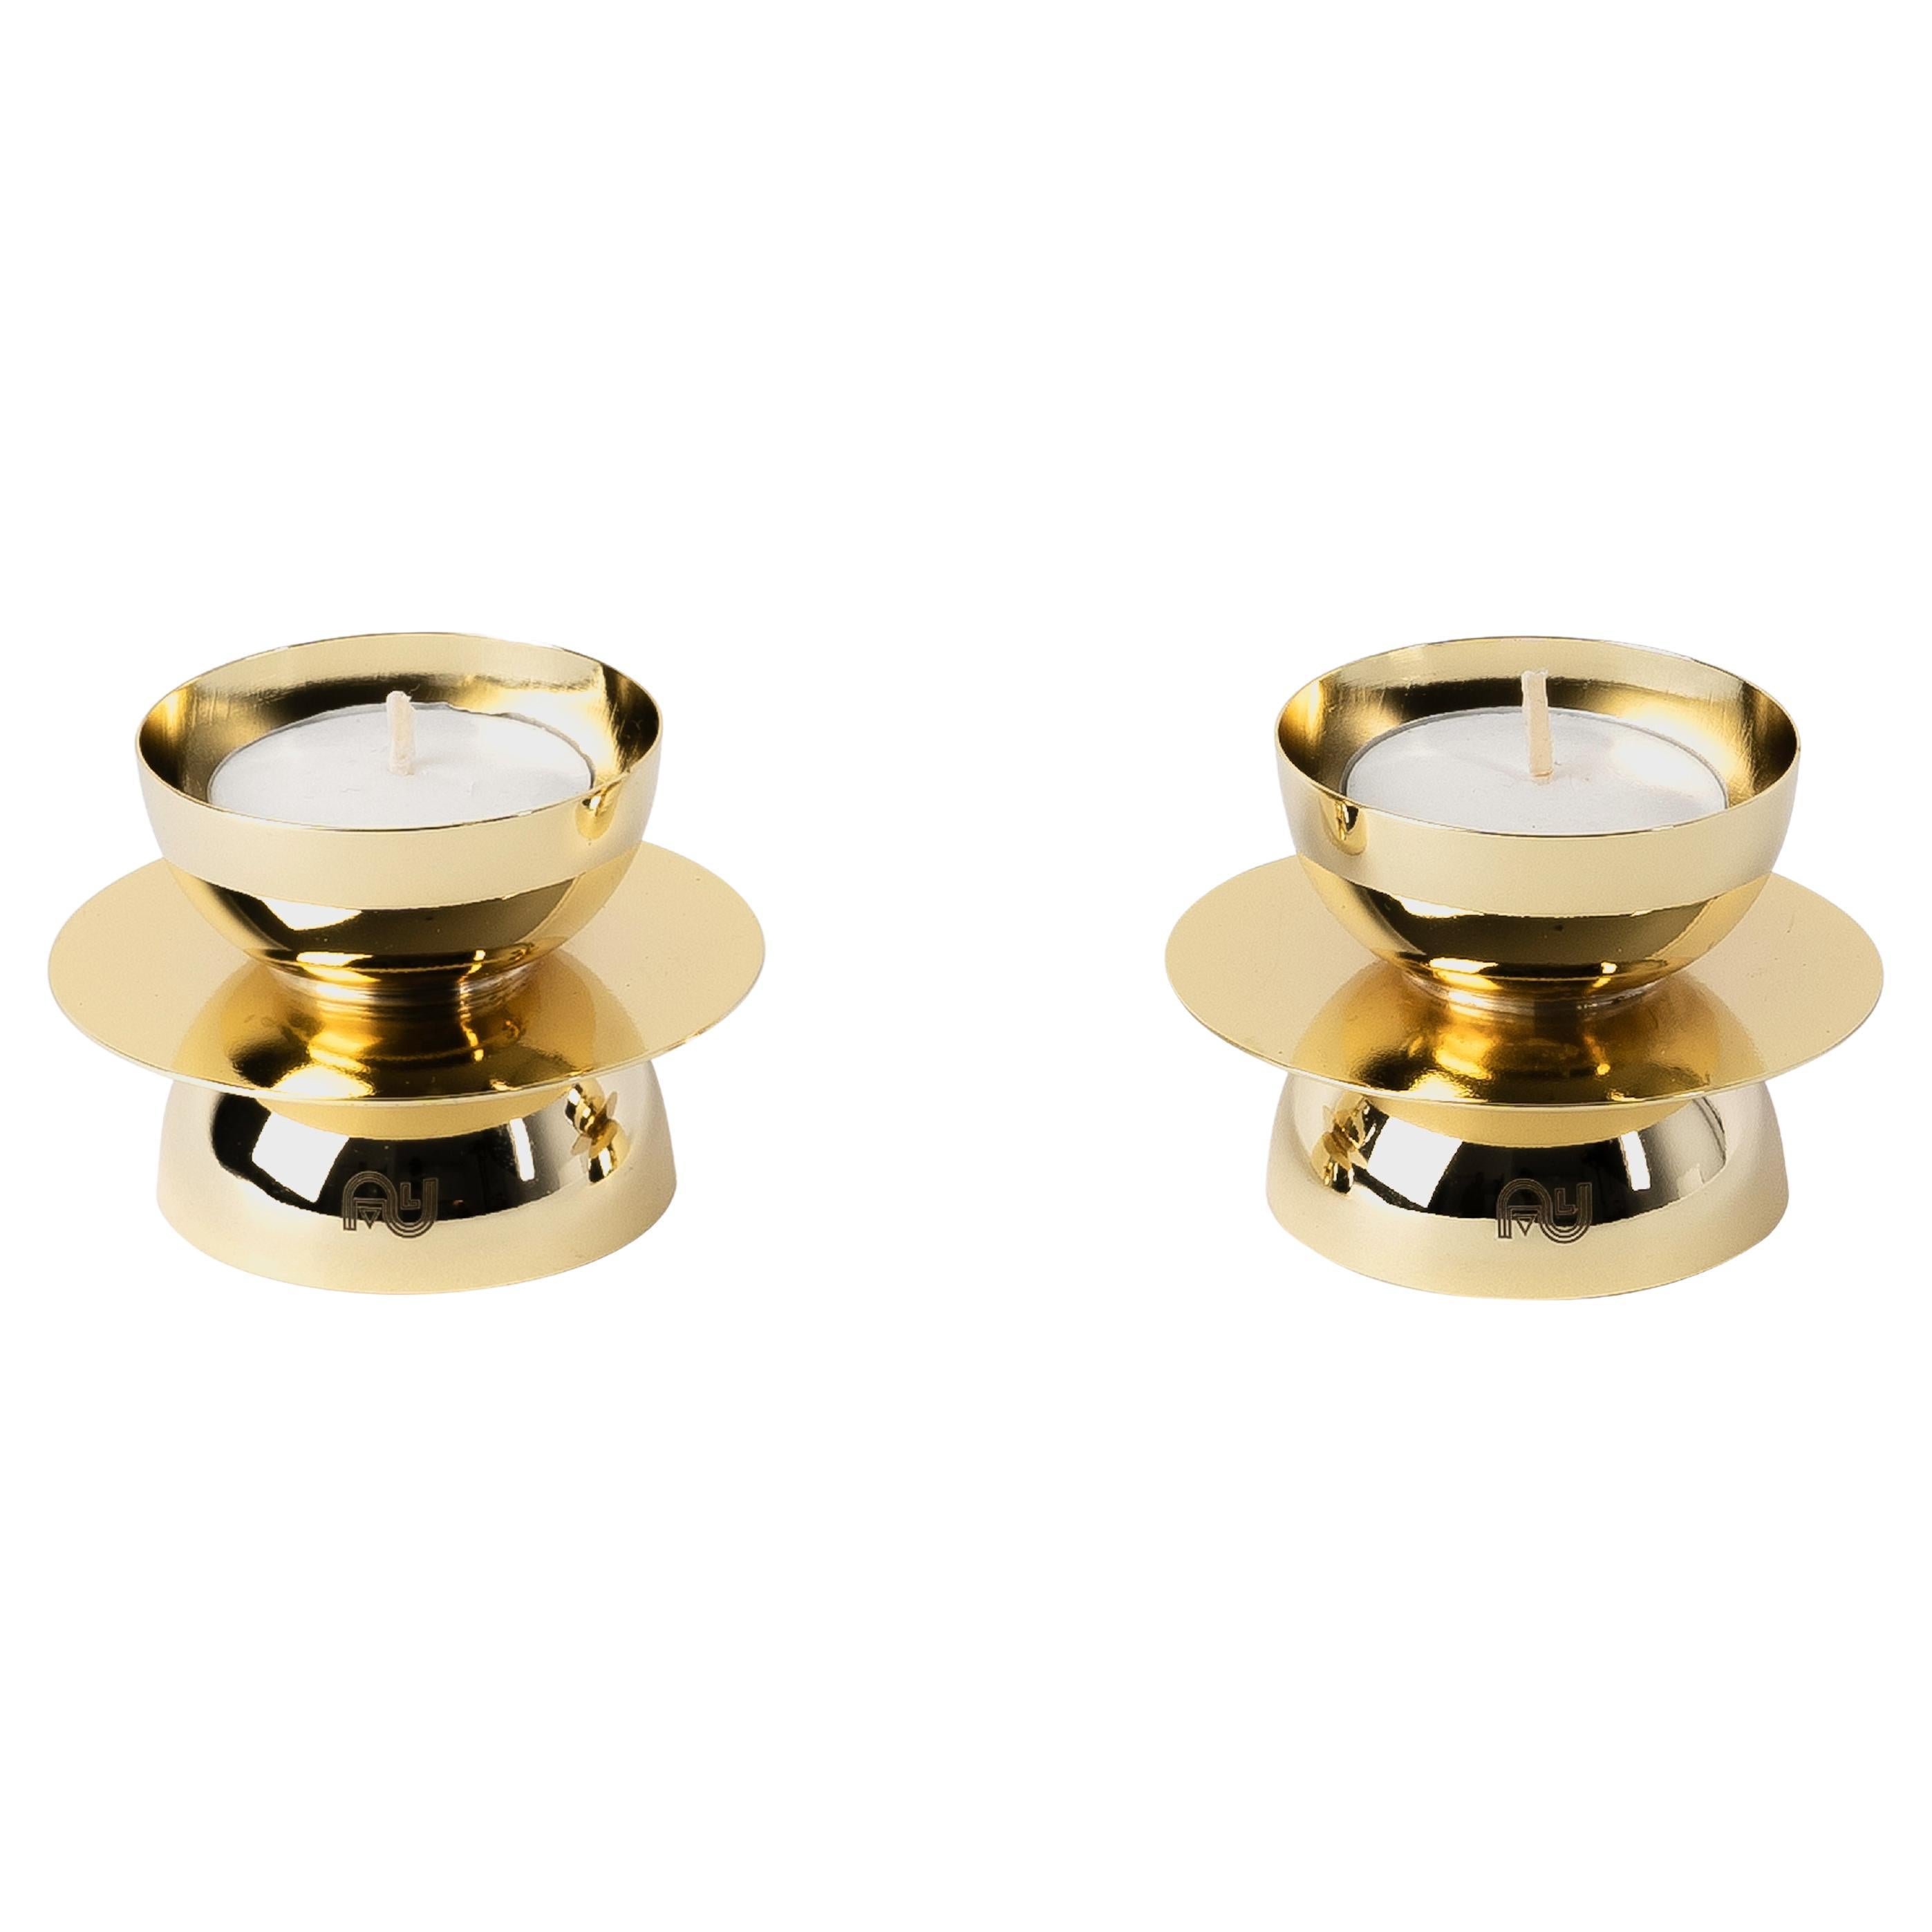 Contemporary Modern, Kubbe Minimal Tealight Holders, Varnished Brass, Set of 2 For Sale